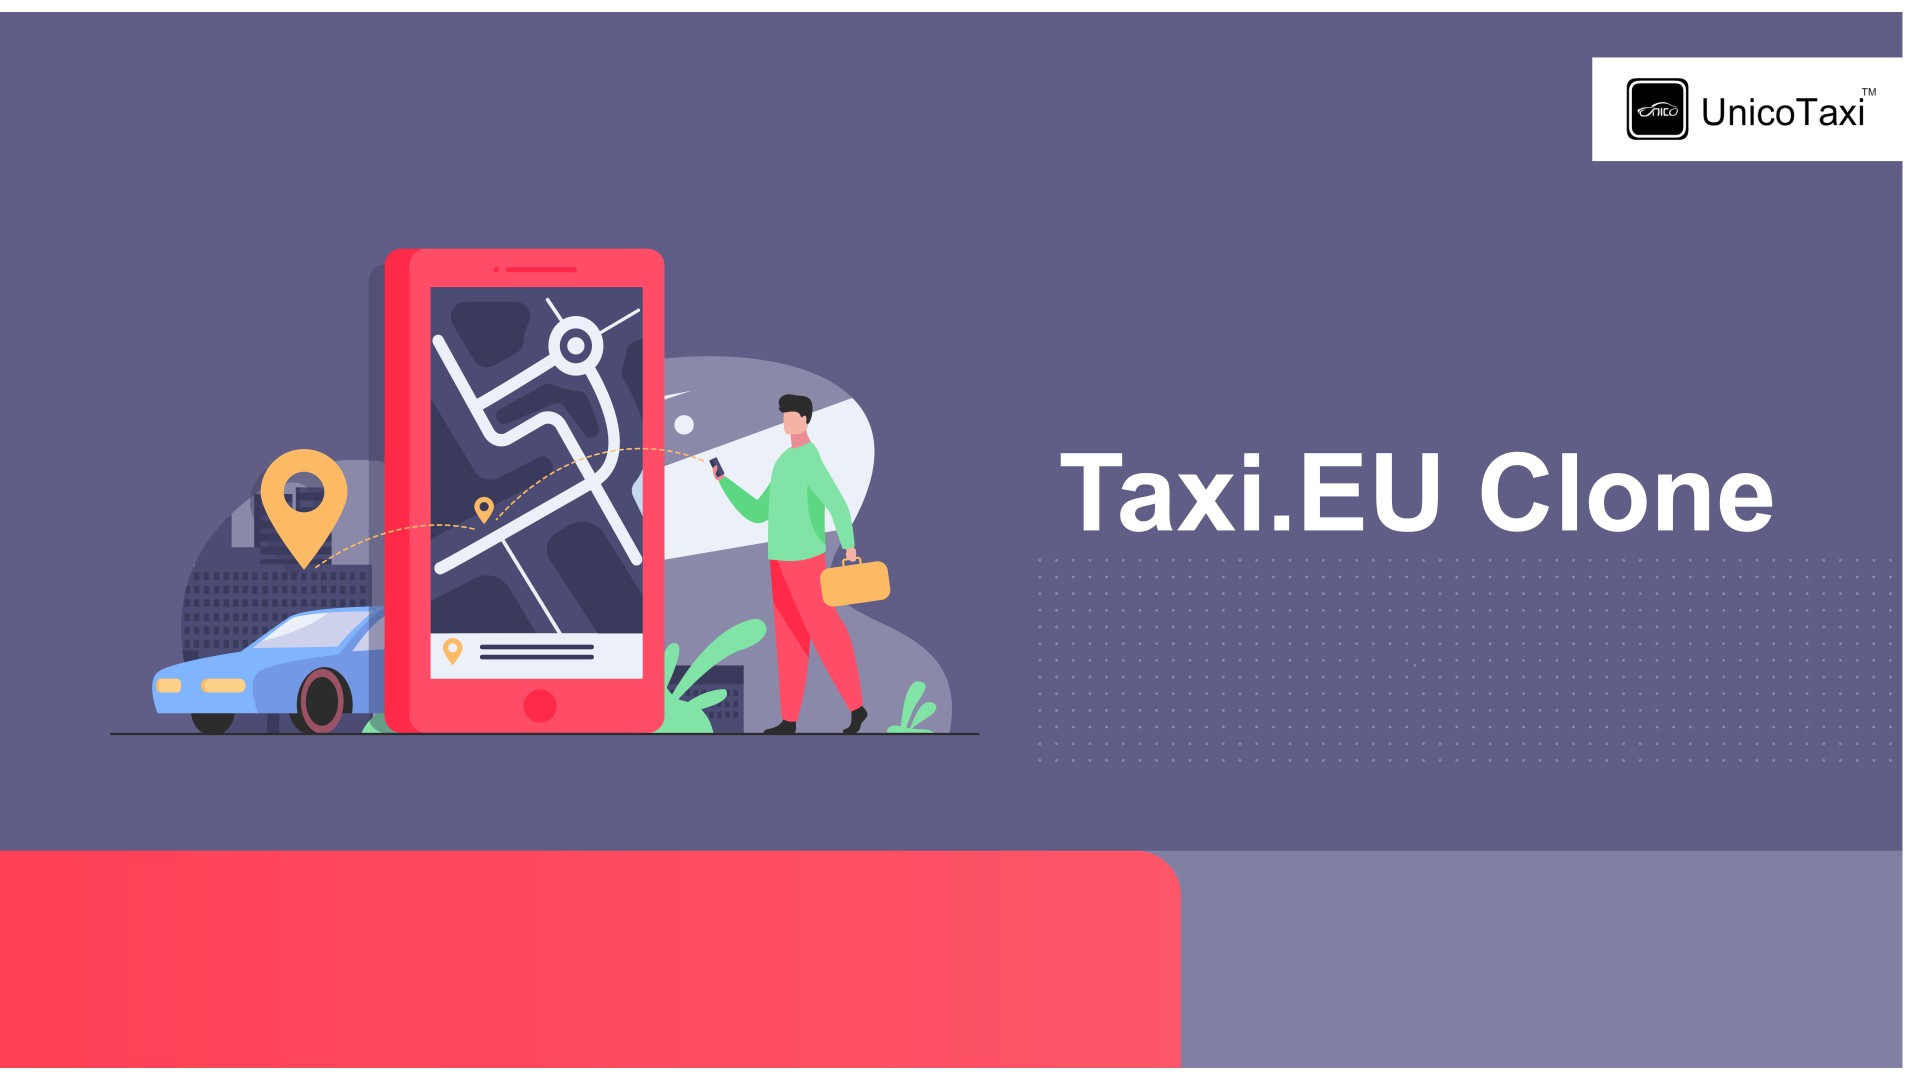 Professional Guide to Create an App Similar to Taxi.EU Clone